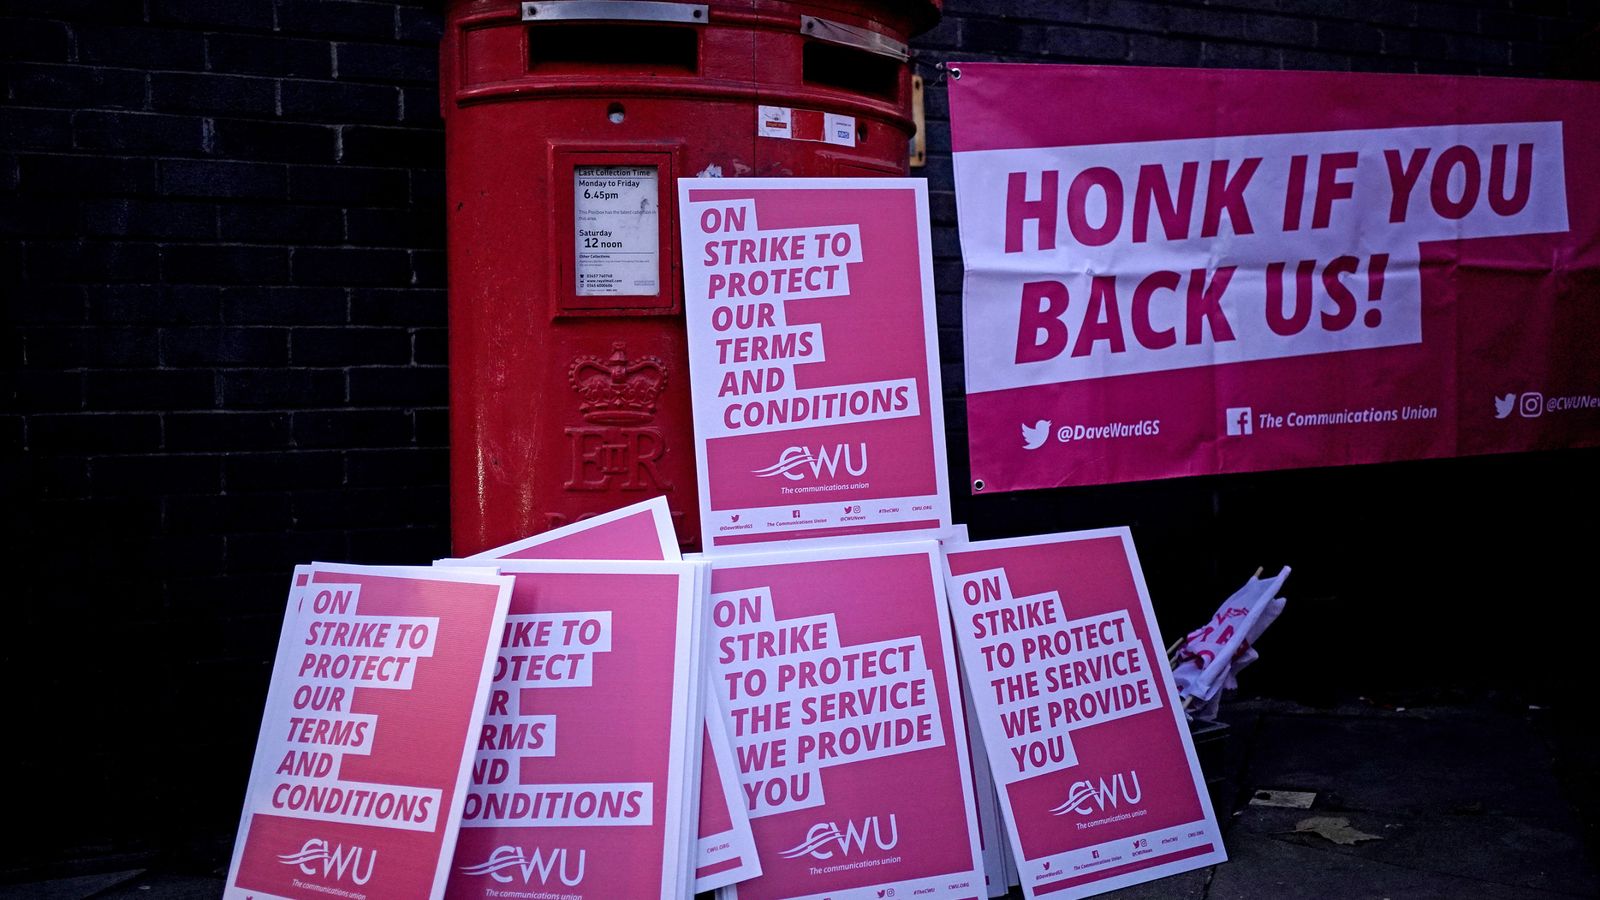 Black Friday threat as Royal Mail staff begin 'disastrous' 48-hour strike